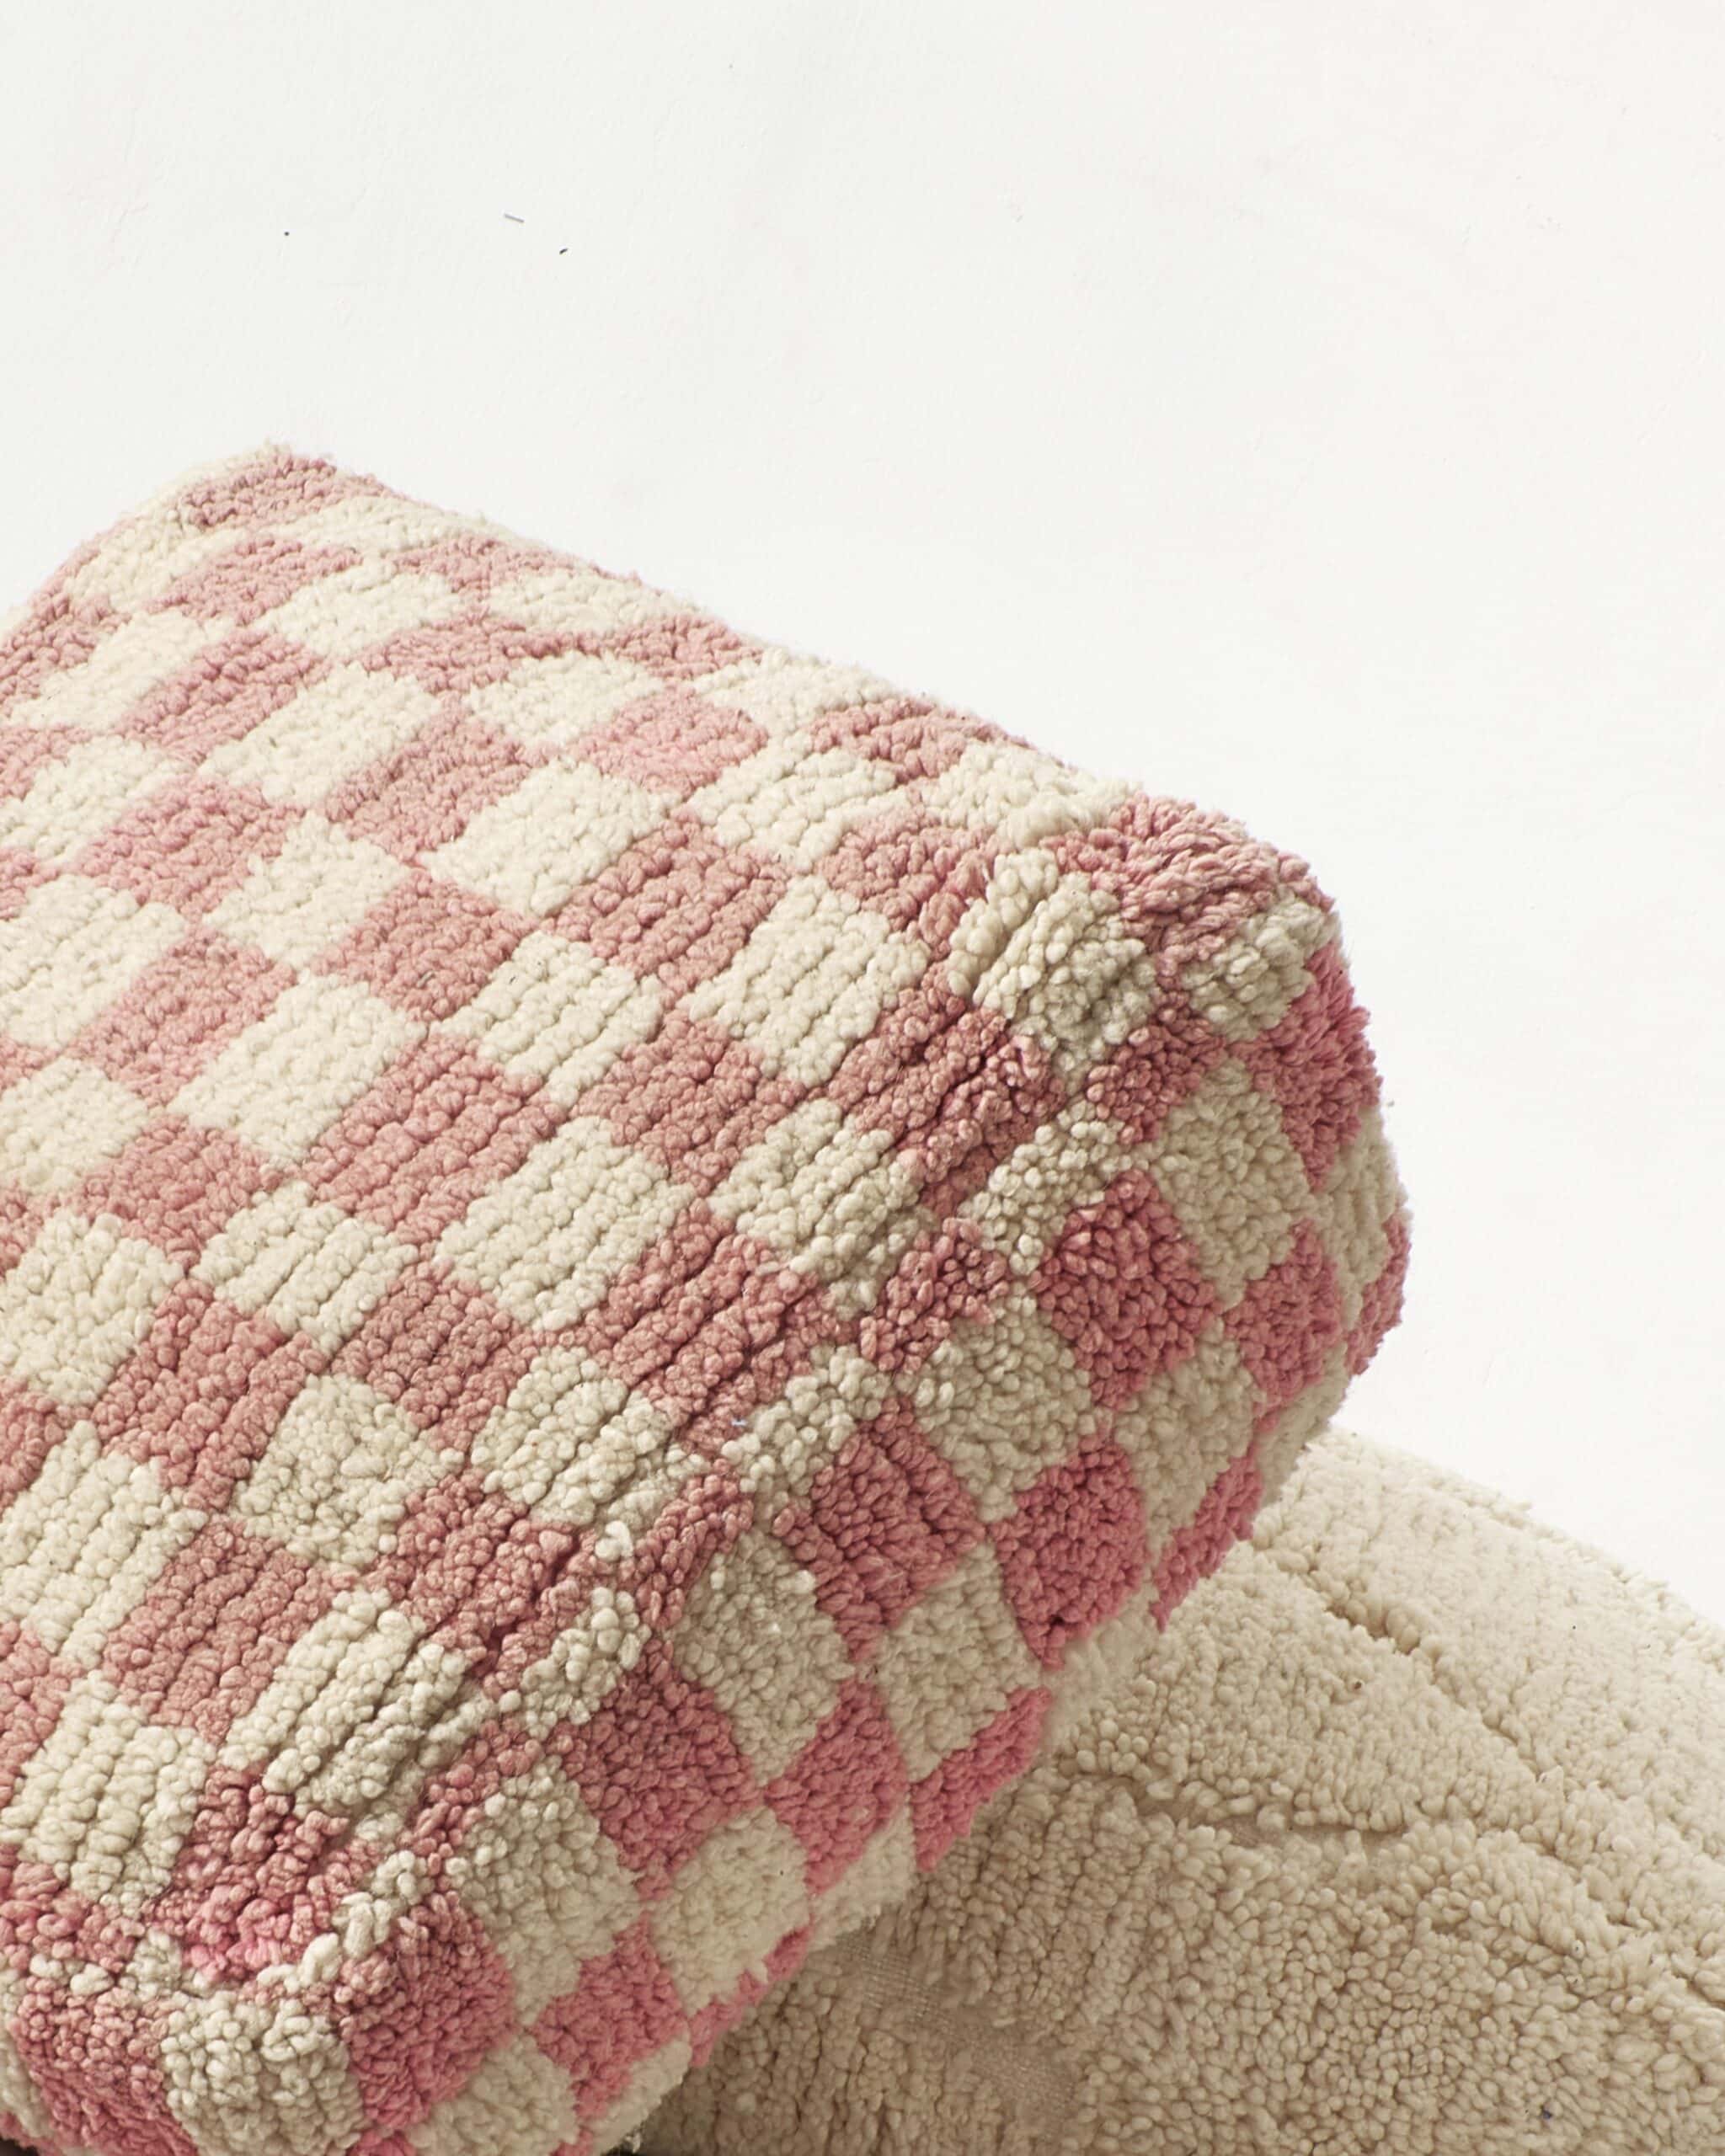 Faded pink checkered rug